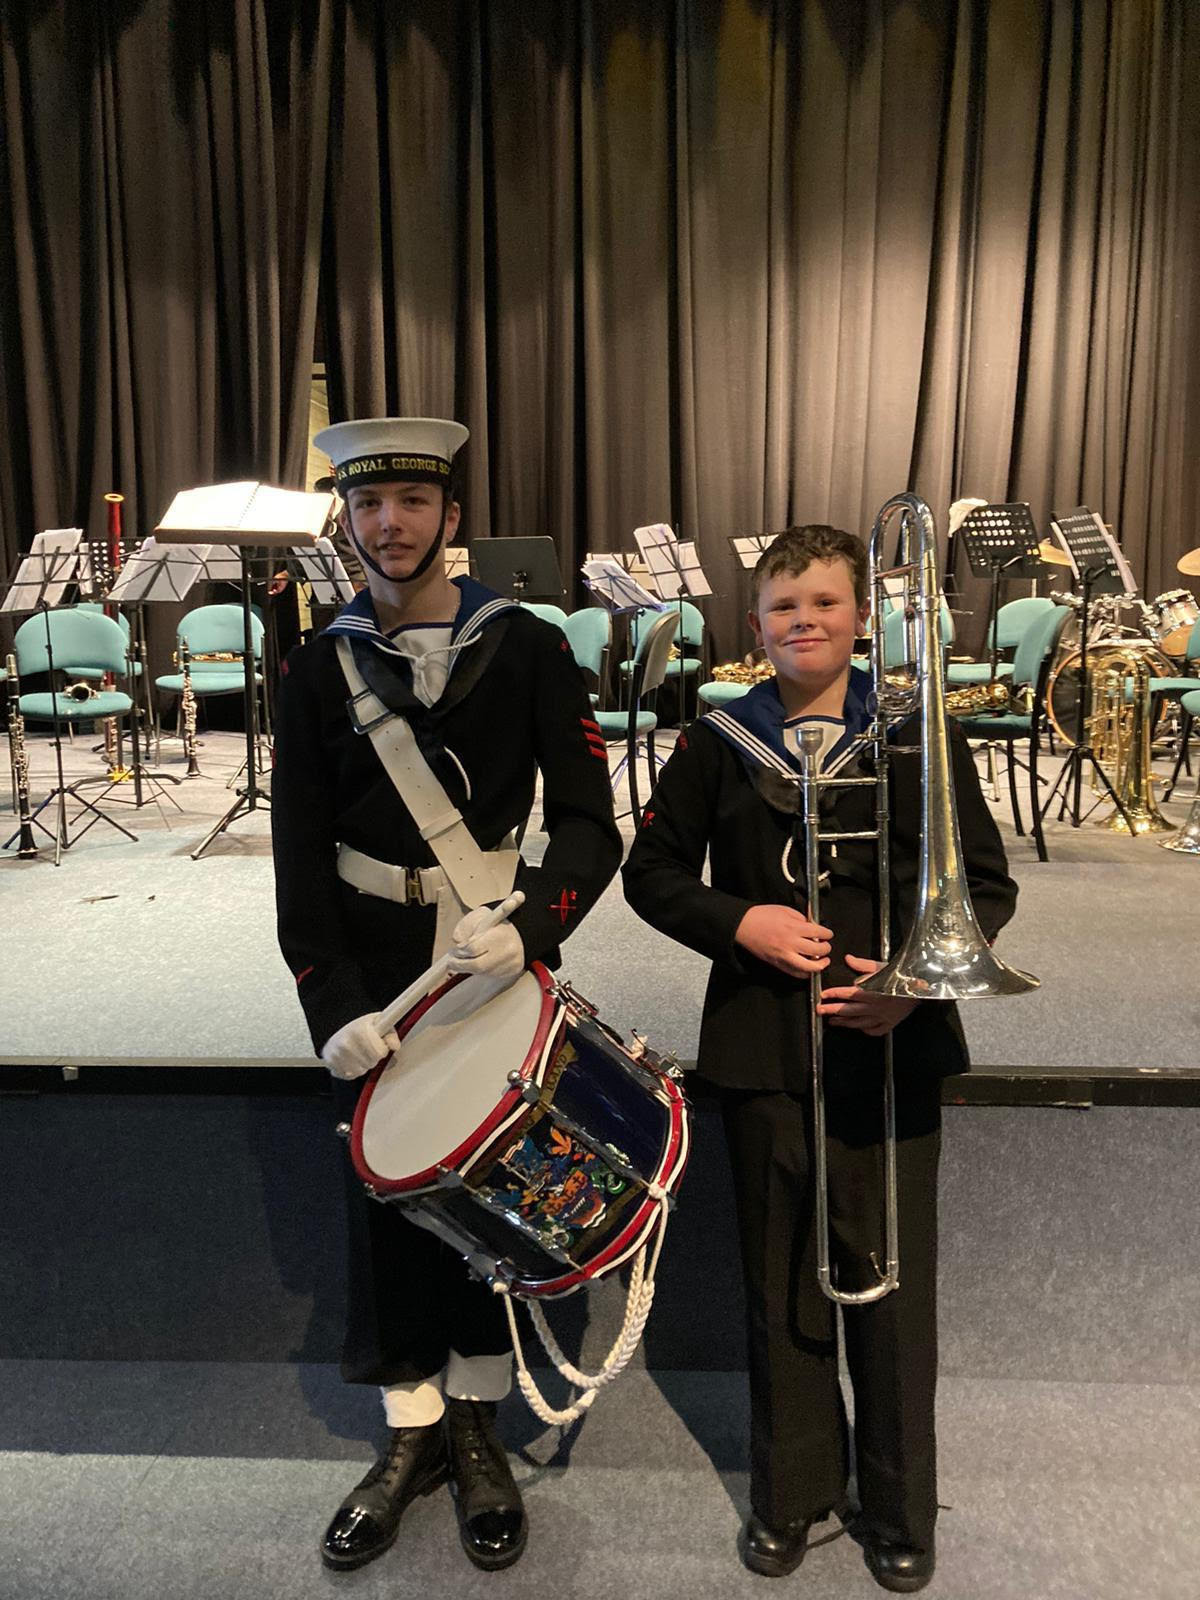 National Band Course at HMS Raleigh